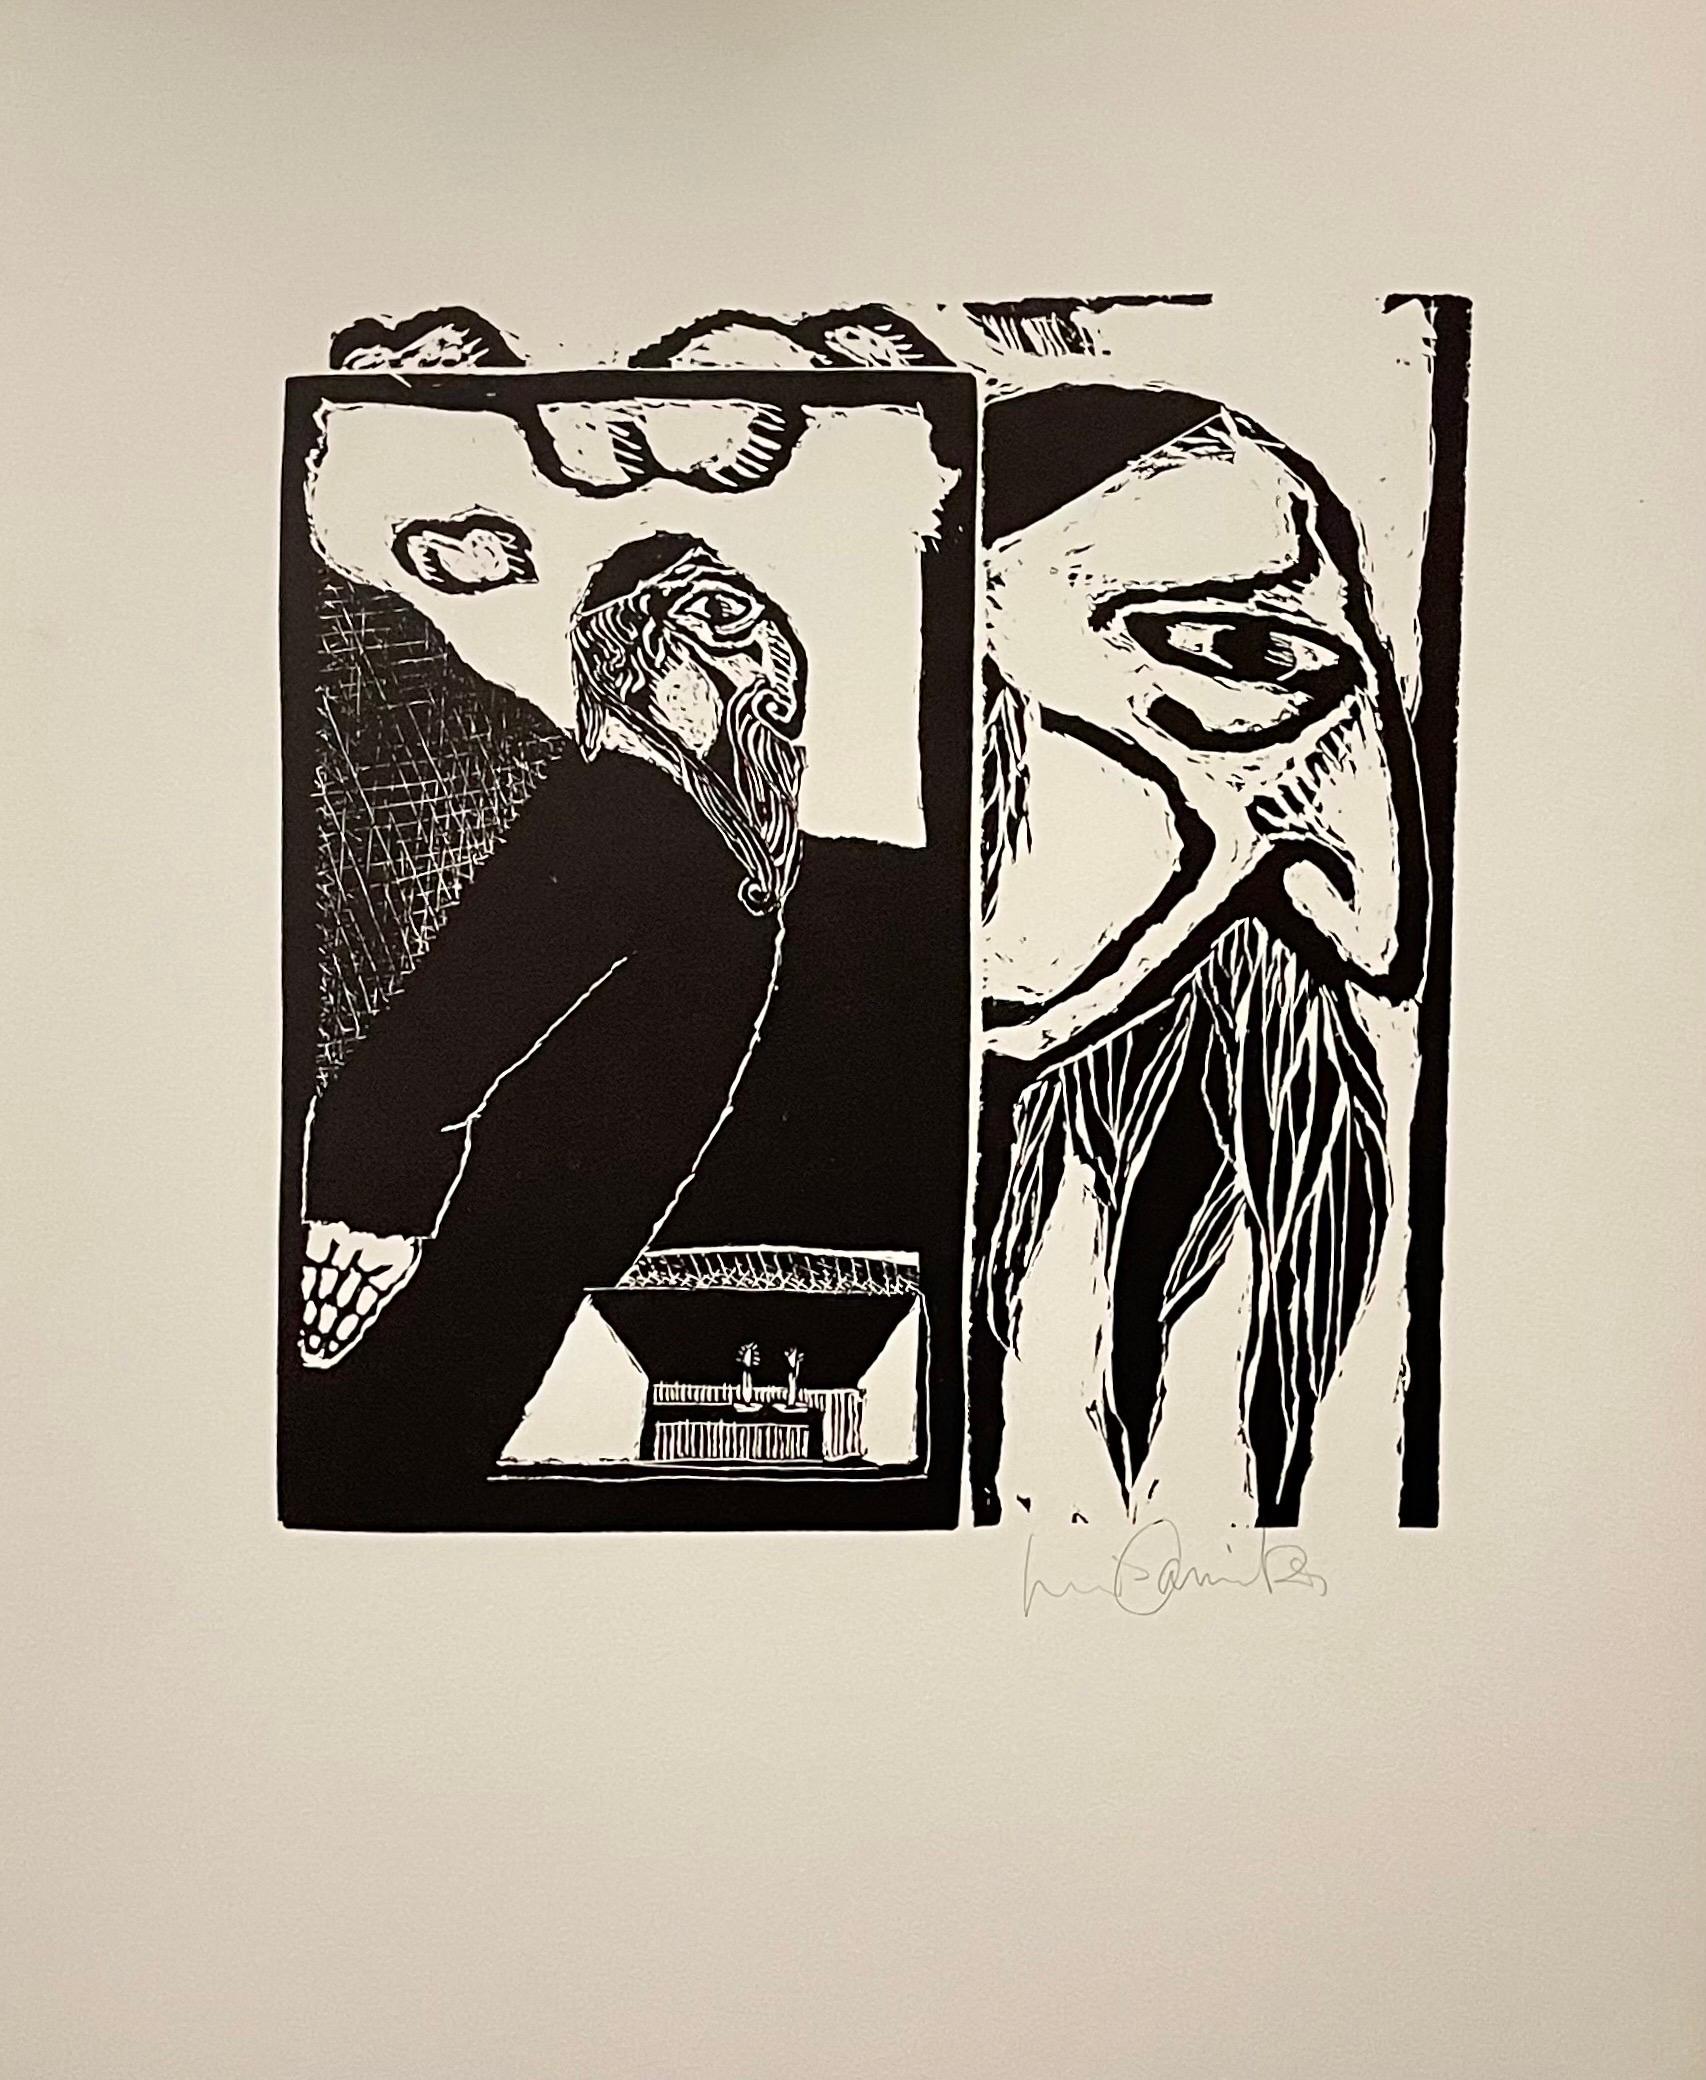 Luis Camnitzer and Martin Buber (1878-1965), 
New York: JMB Publishers Ltd, 1970.
Printed at The New York Graphic Workshop. 
Hand signed on Arches paper. (Edition 24/100, numbered on Justification page)

Woodblock prints based on folktales from the